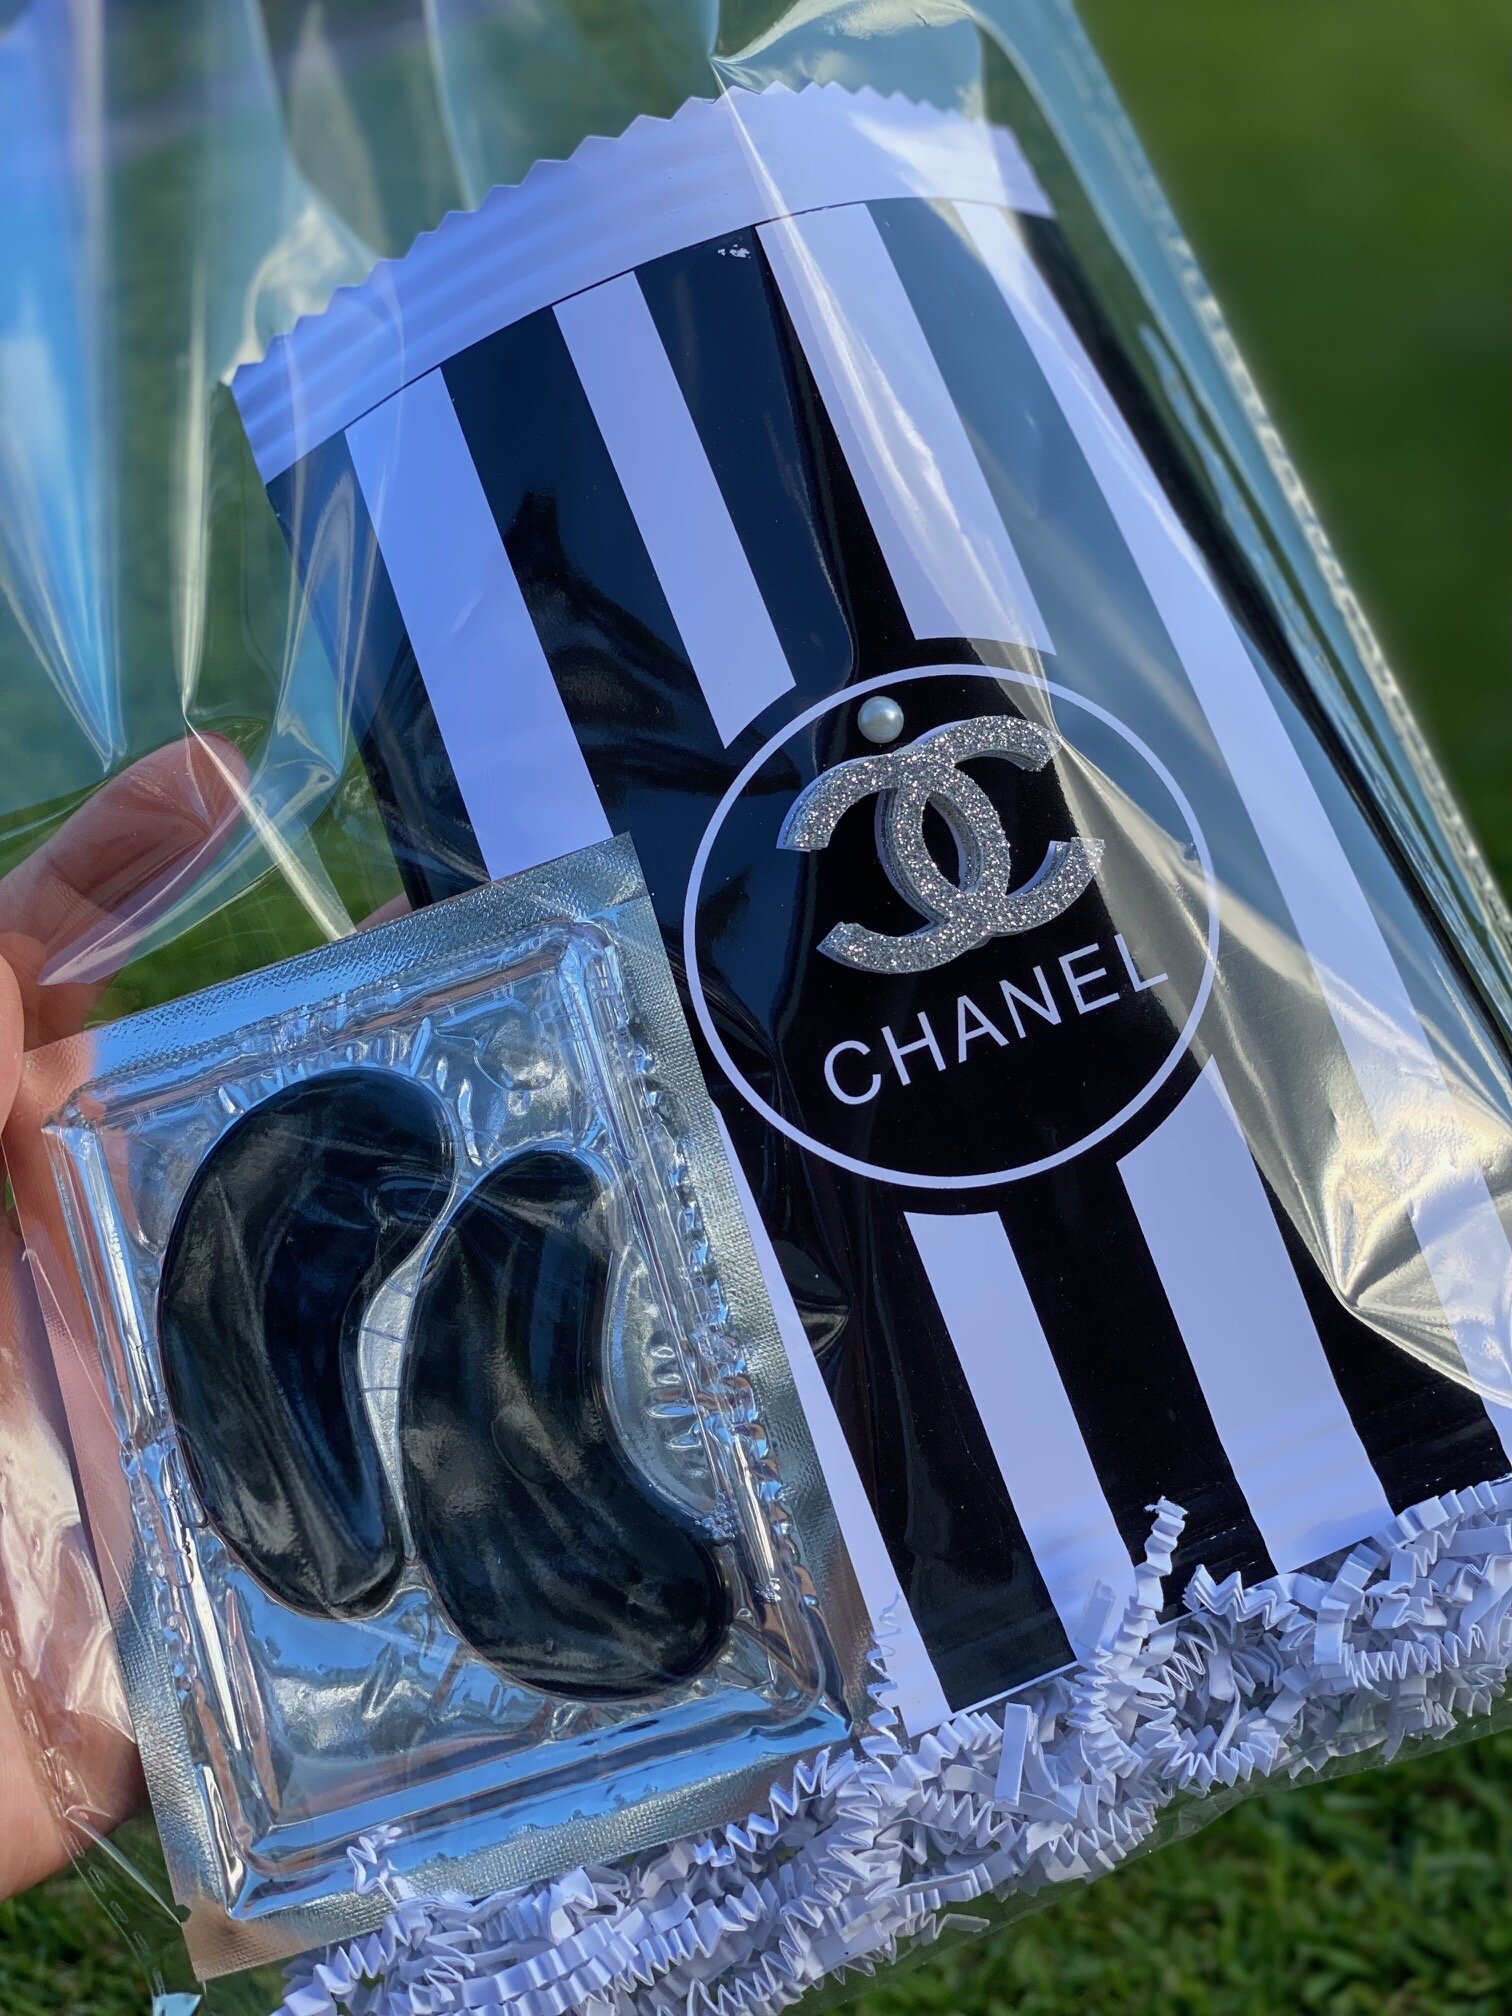 Chanel Favor Chip Bags with Hydrating Collagen Eye Mask Sold in